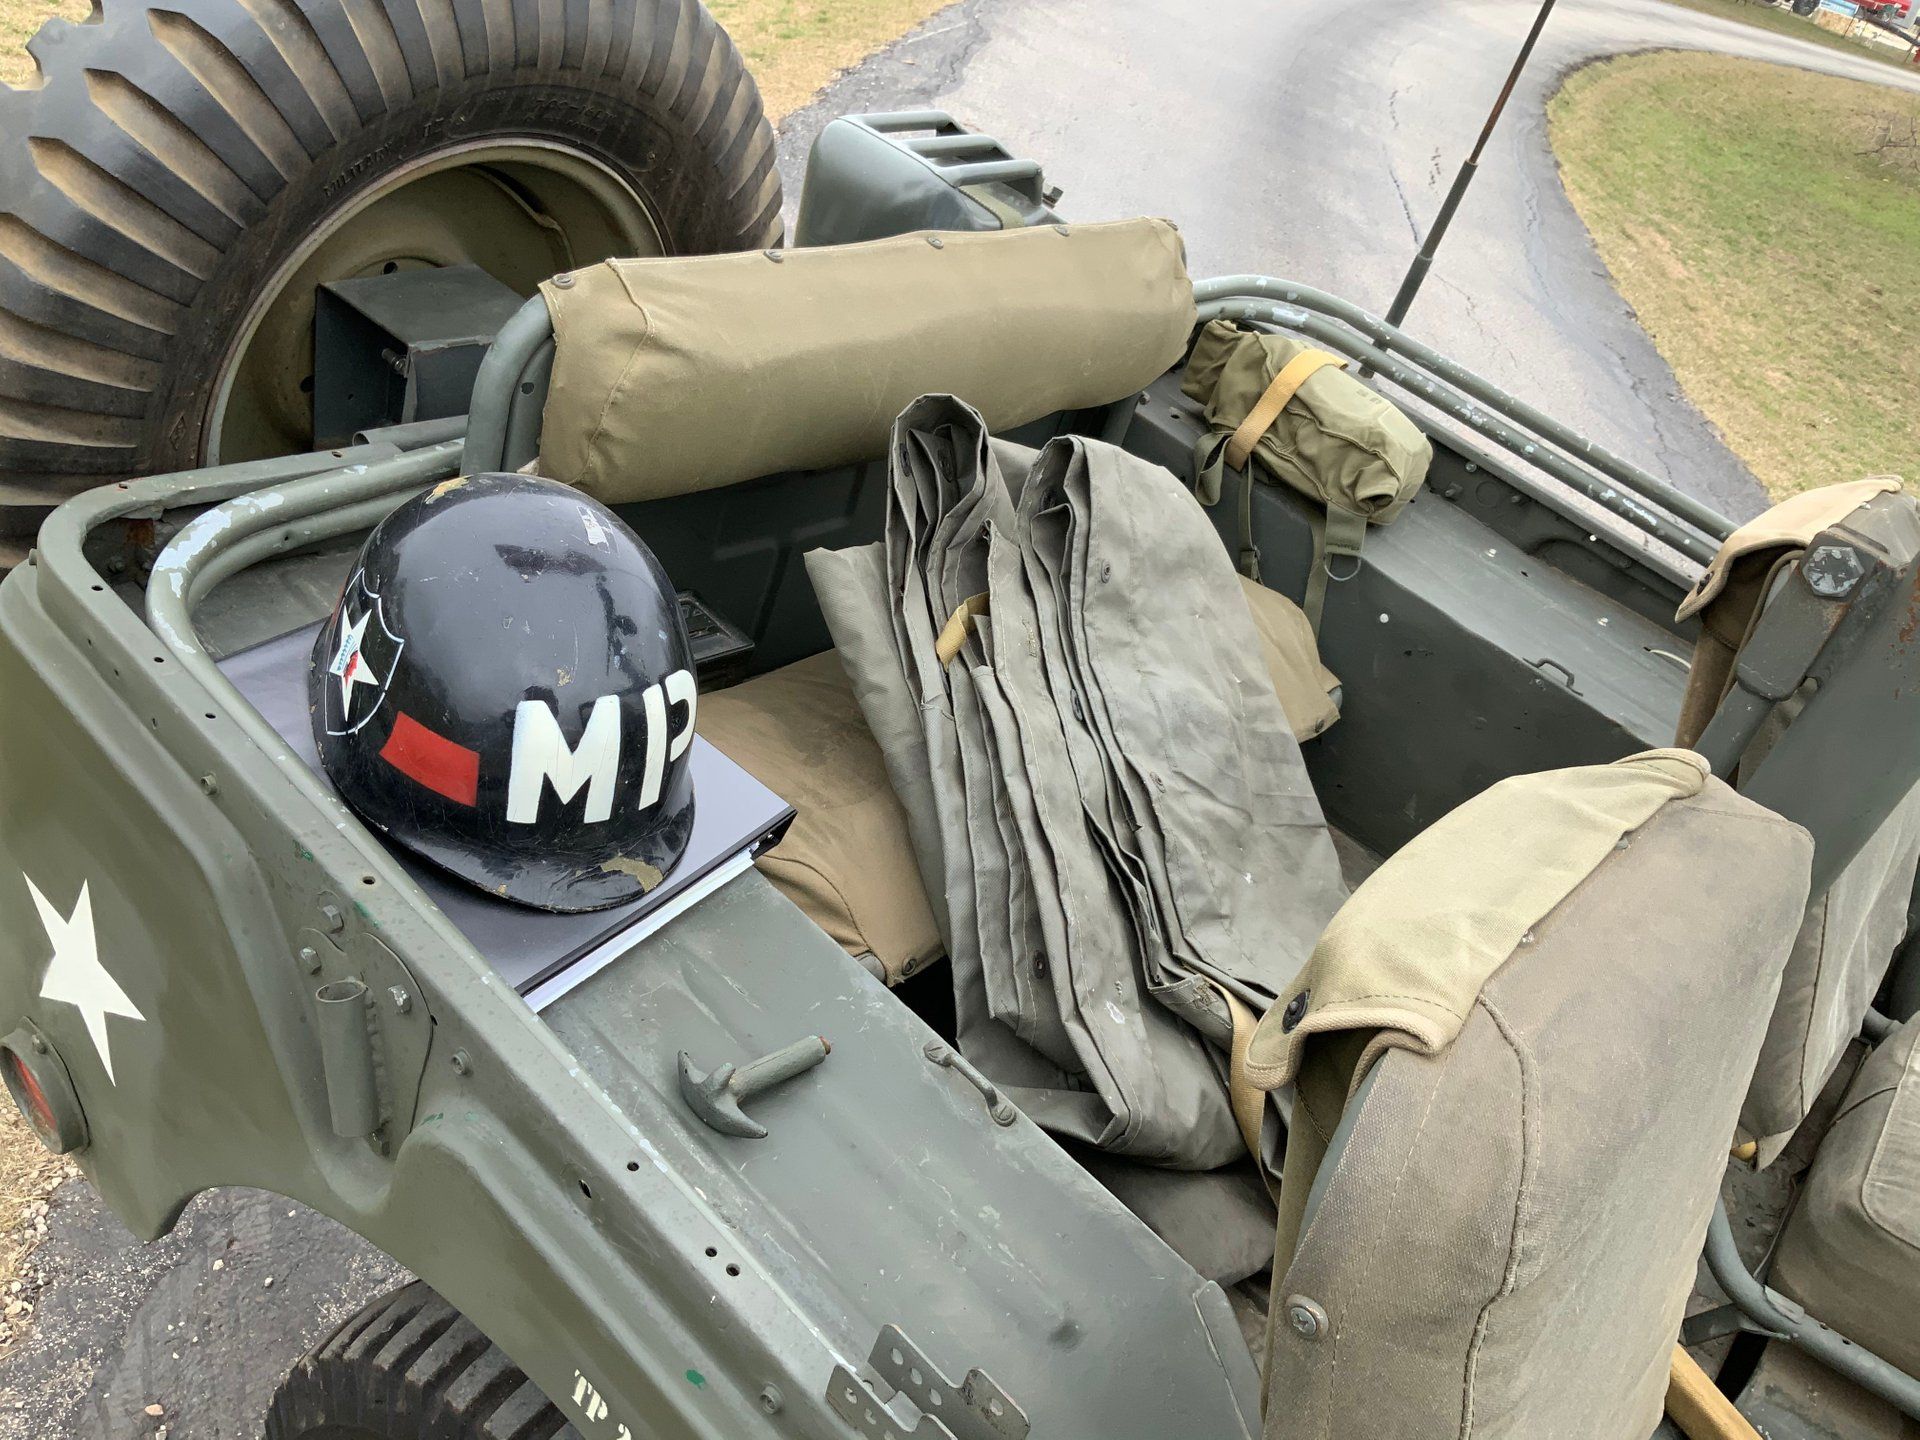 Show Your Patriotism And Buy This 1955 Willys Jeep M38A1